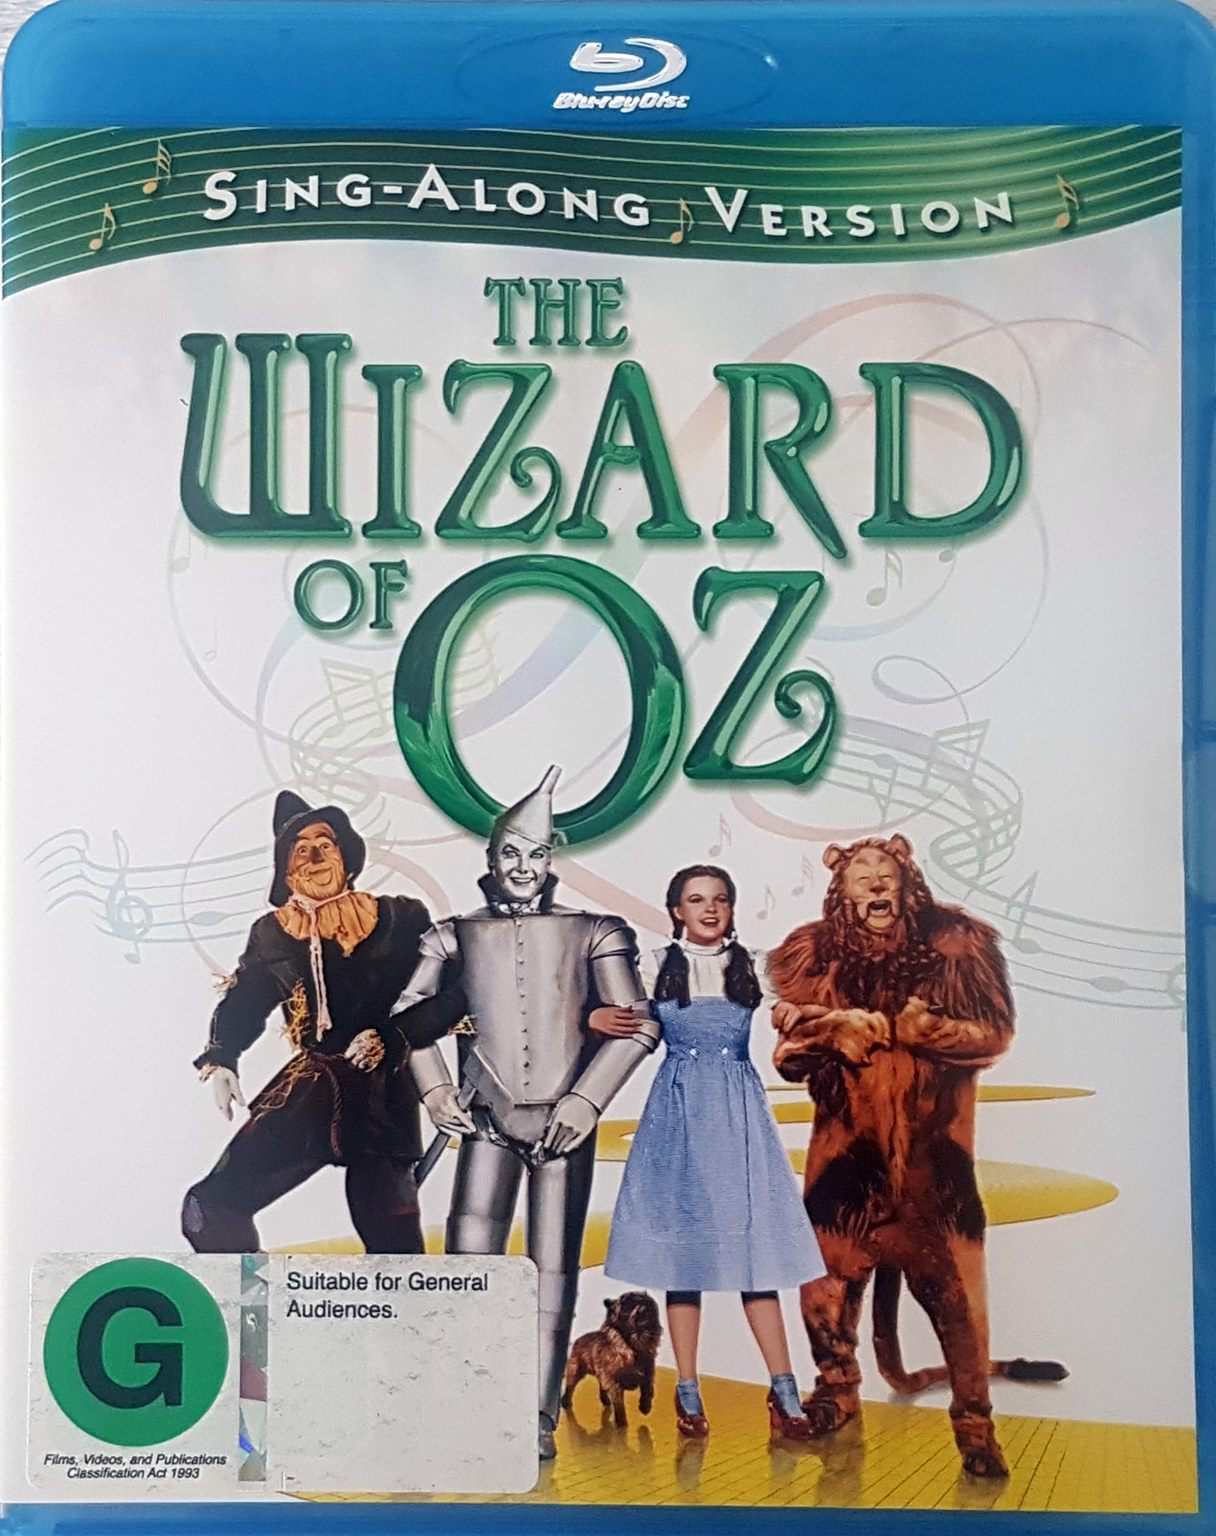 The Wizard of Oz (Blu Ray) Sing-along version Default Title